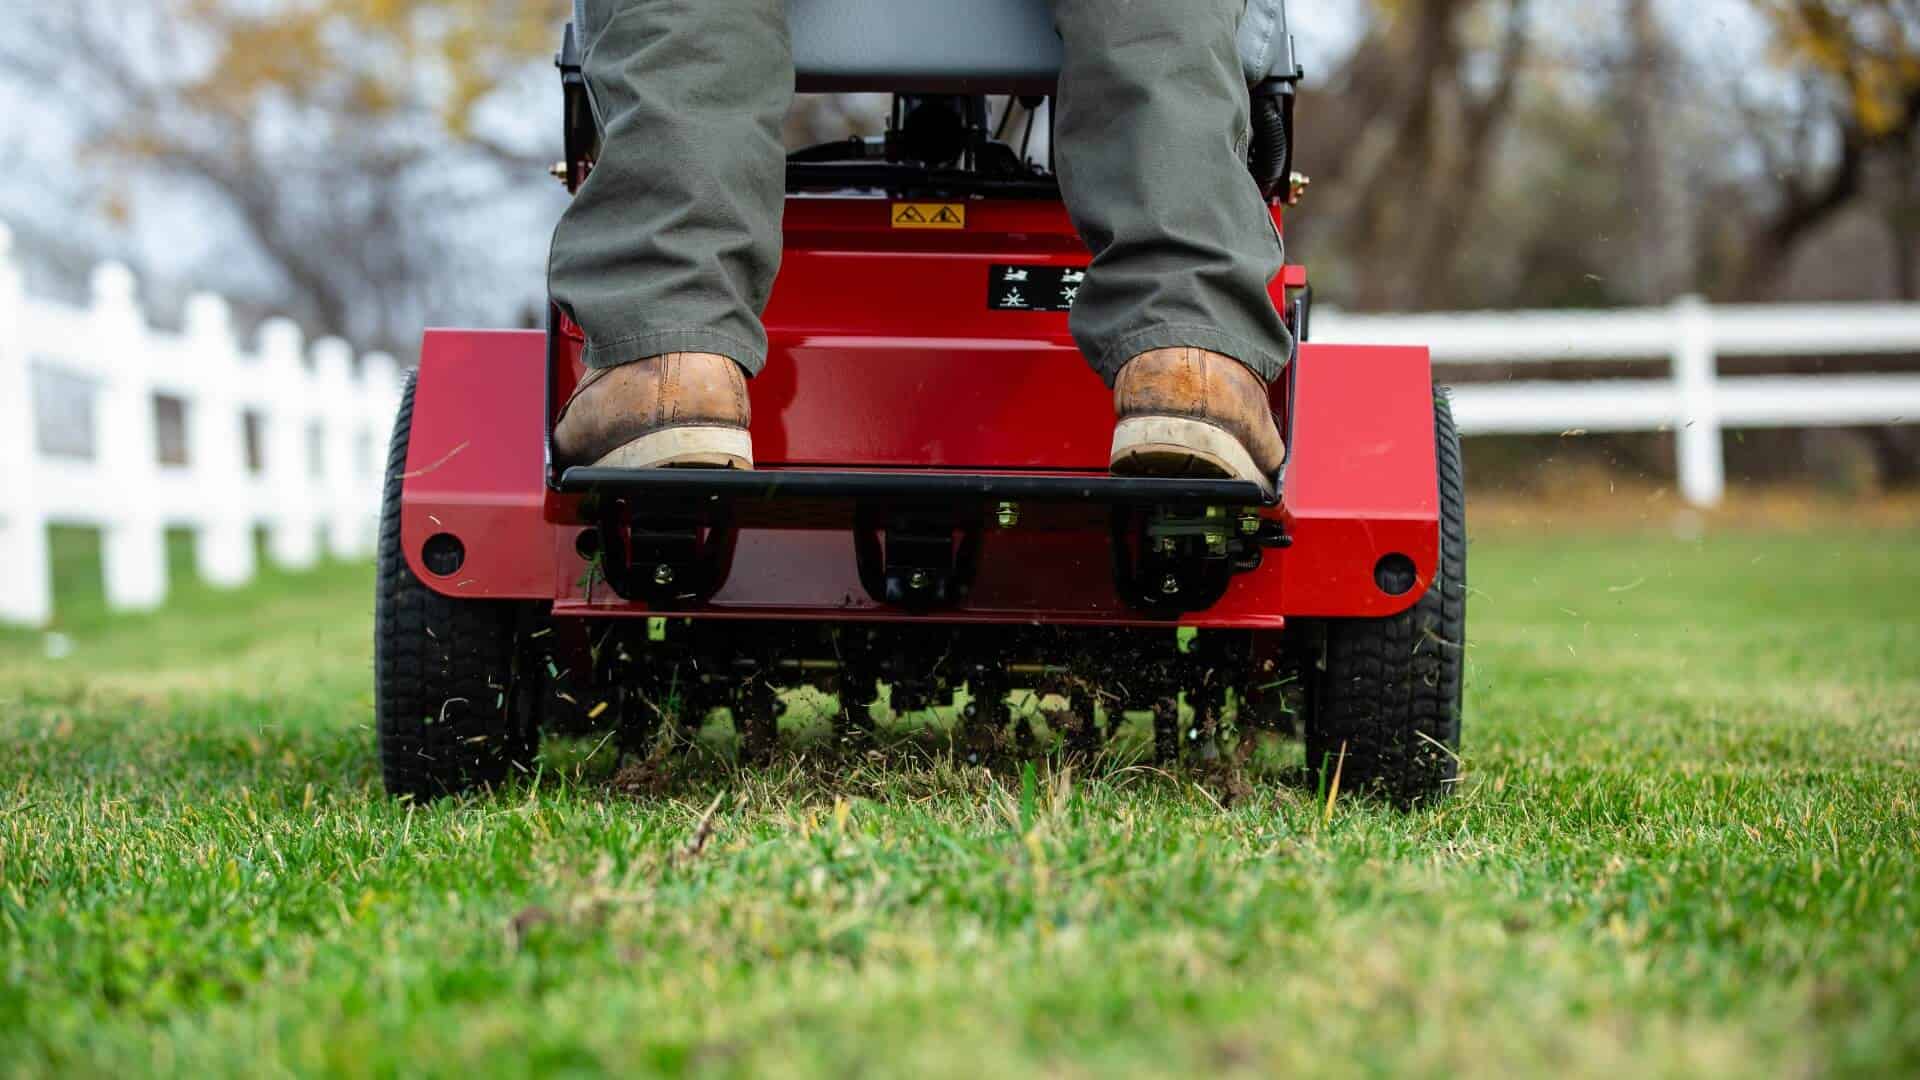 Lawn aeration with an Exmark stand-on aerator